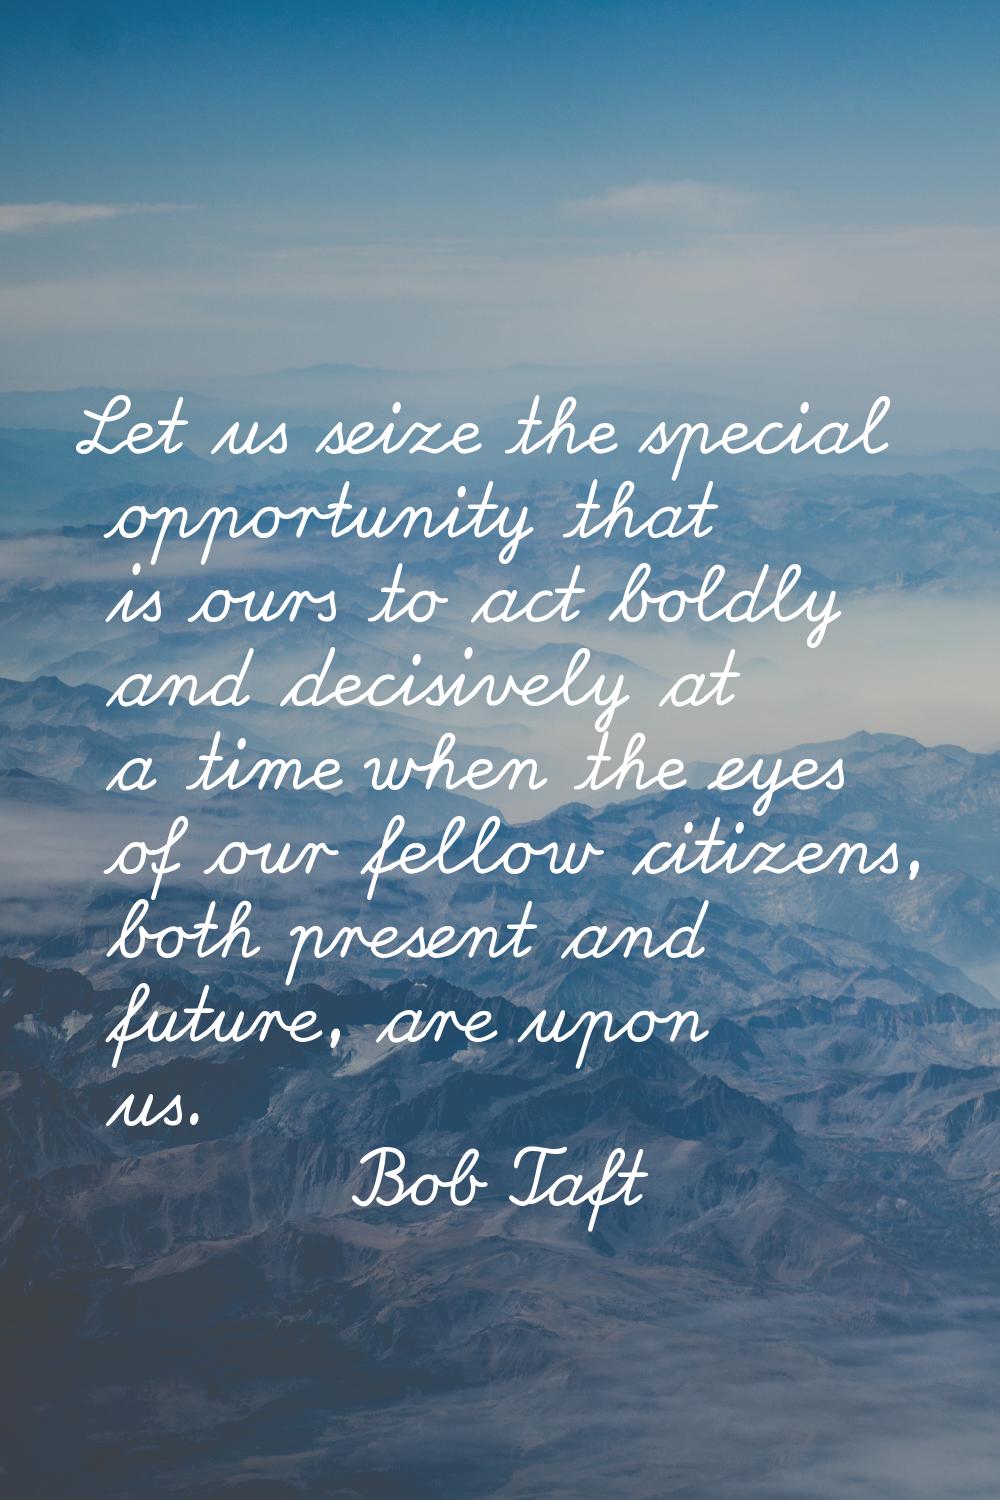 Let us seize the special opportunity that is ours to act boldly and decisively at a time when the e